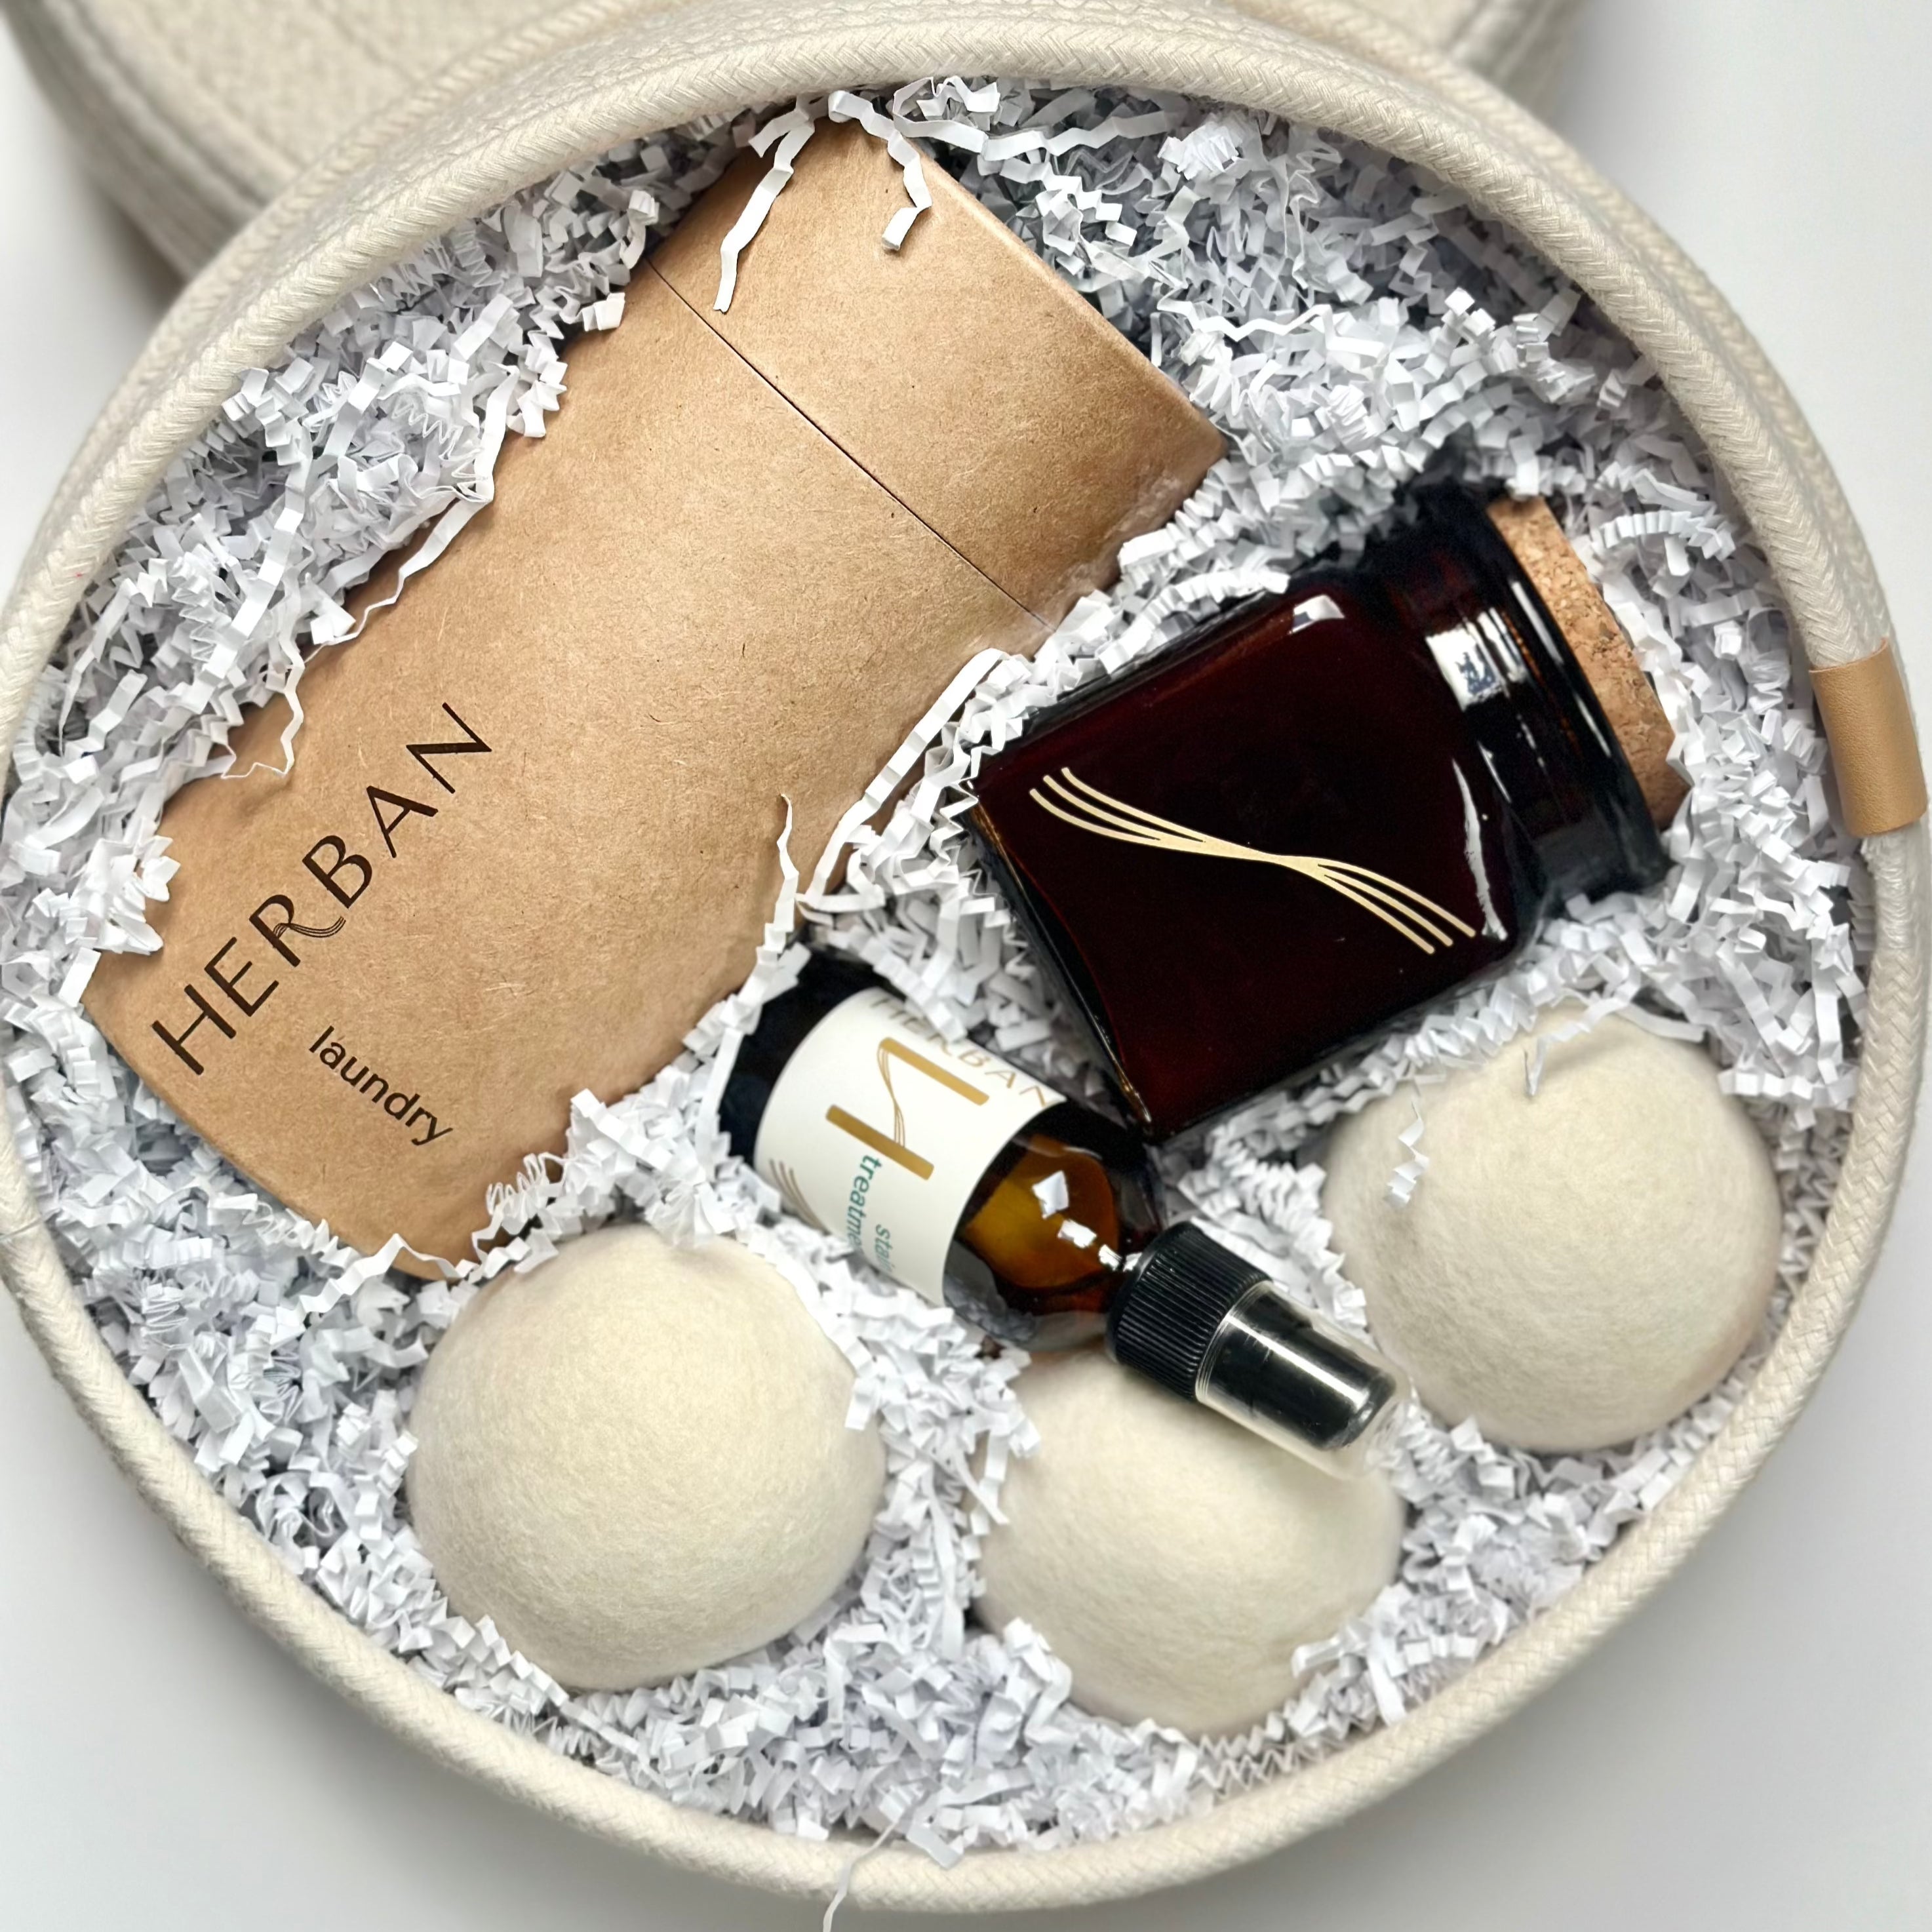 Cotton round rope basket filled with Laundry powder packaged in a paper tube, Wool dryer balls, soy candle in square amber glass and an amber glass of stain removing spray.  